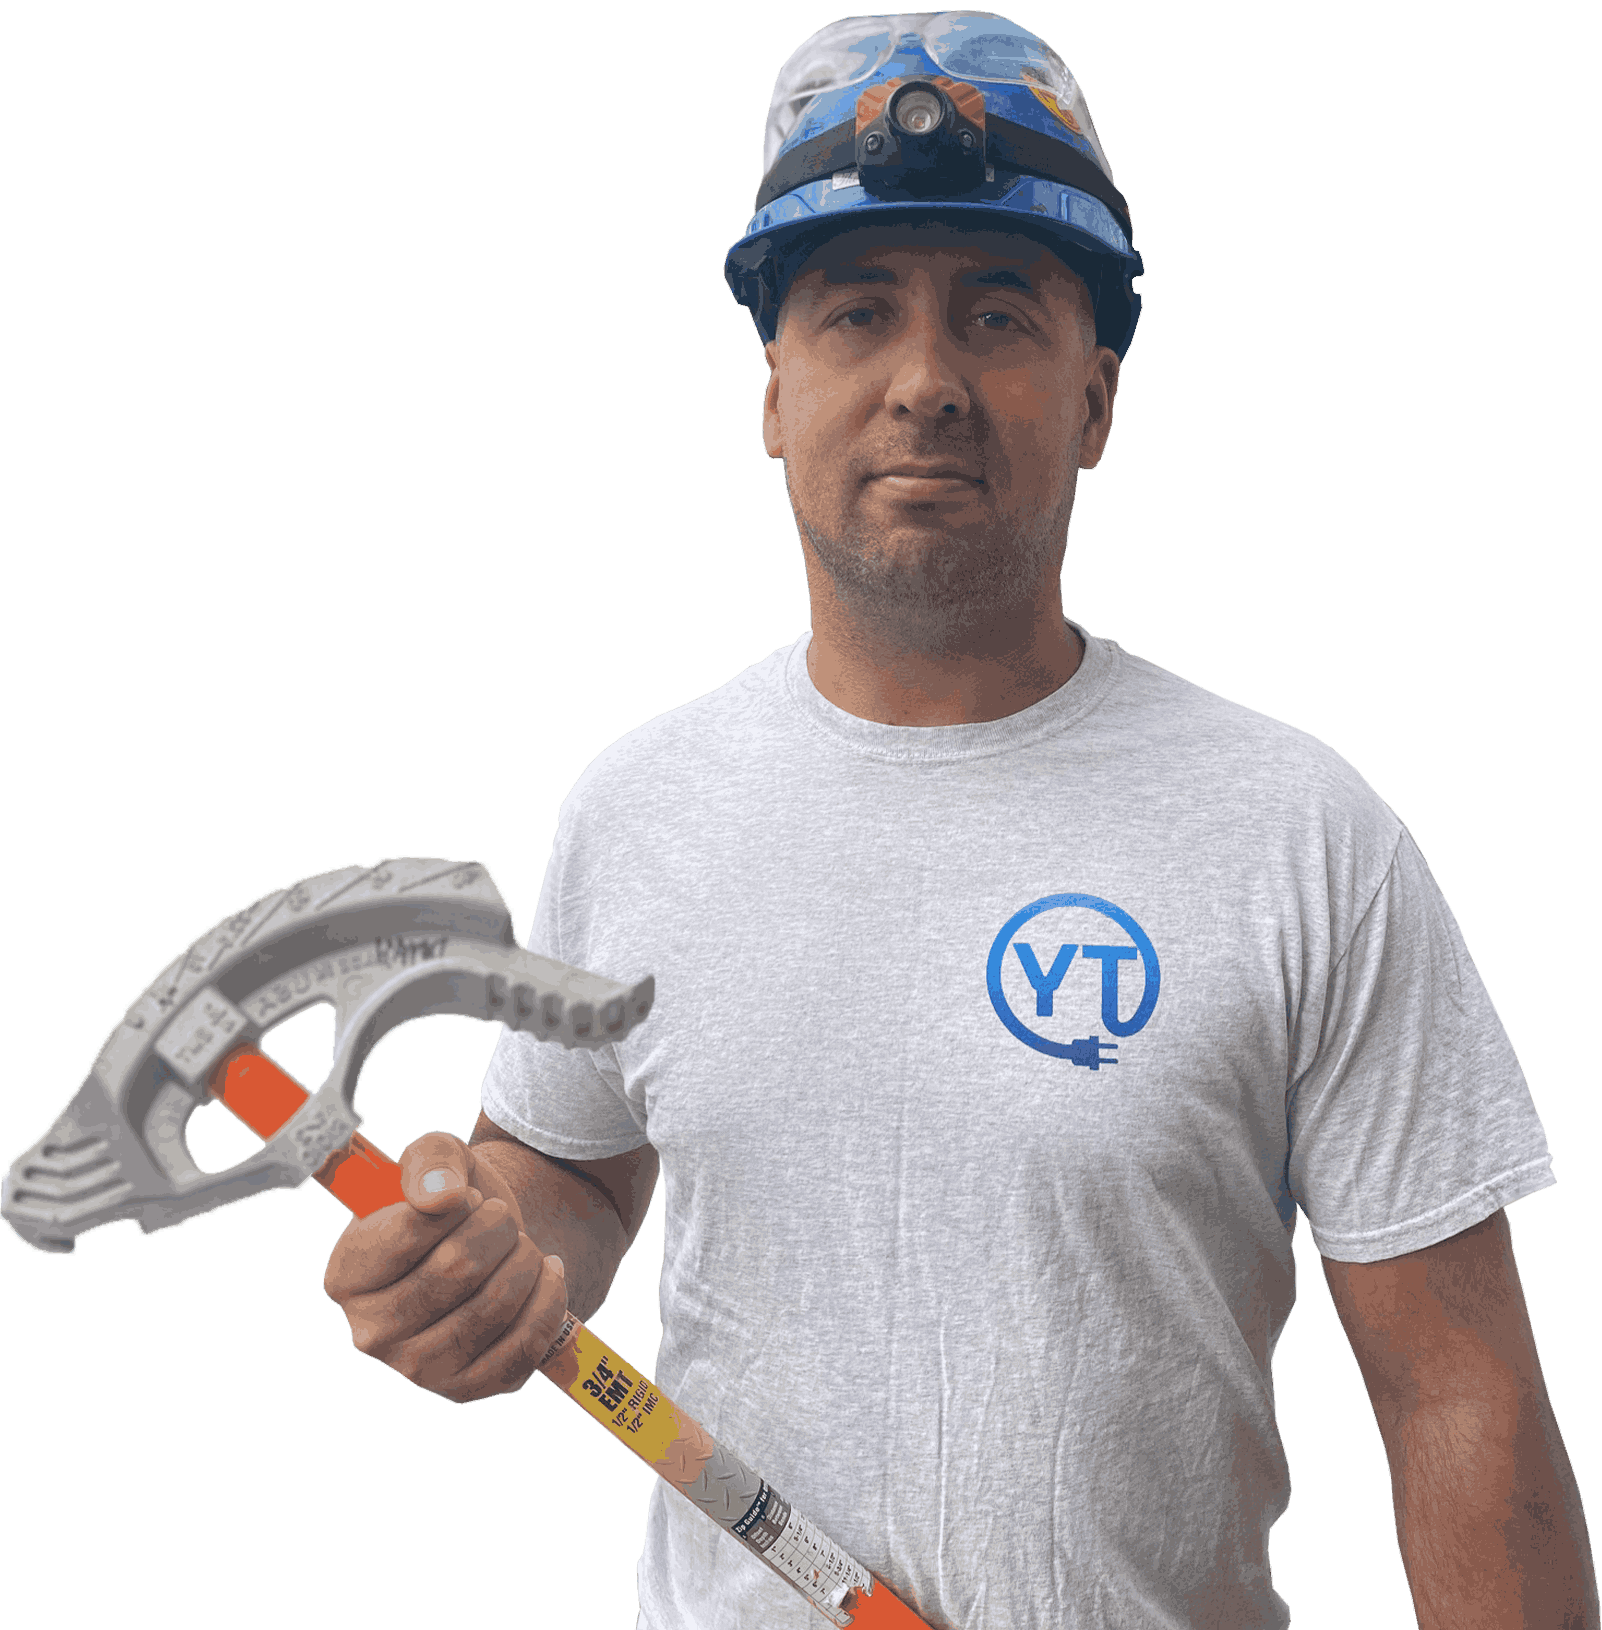 An electrician carrying a tool